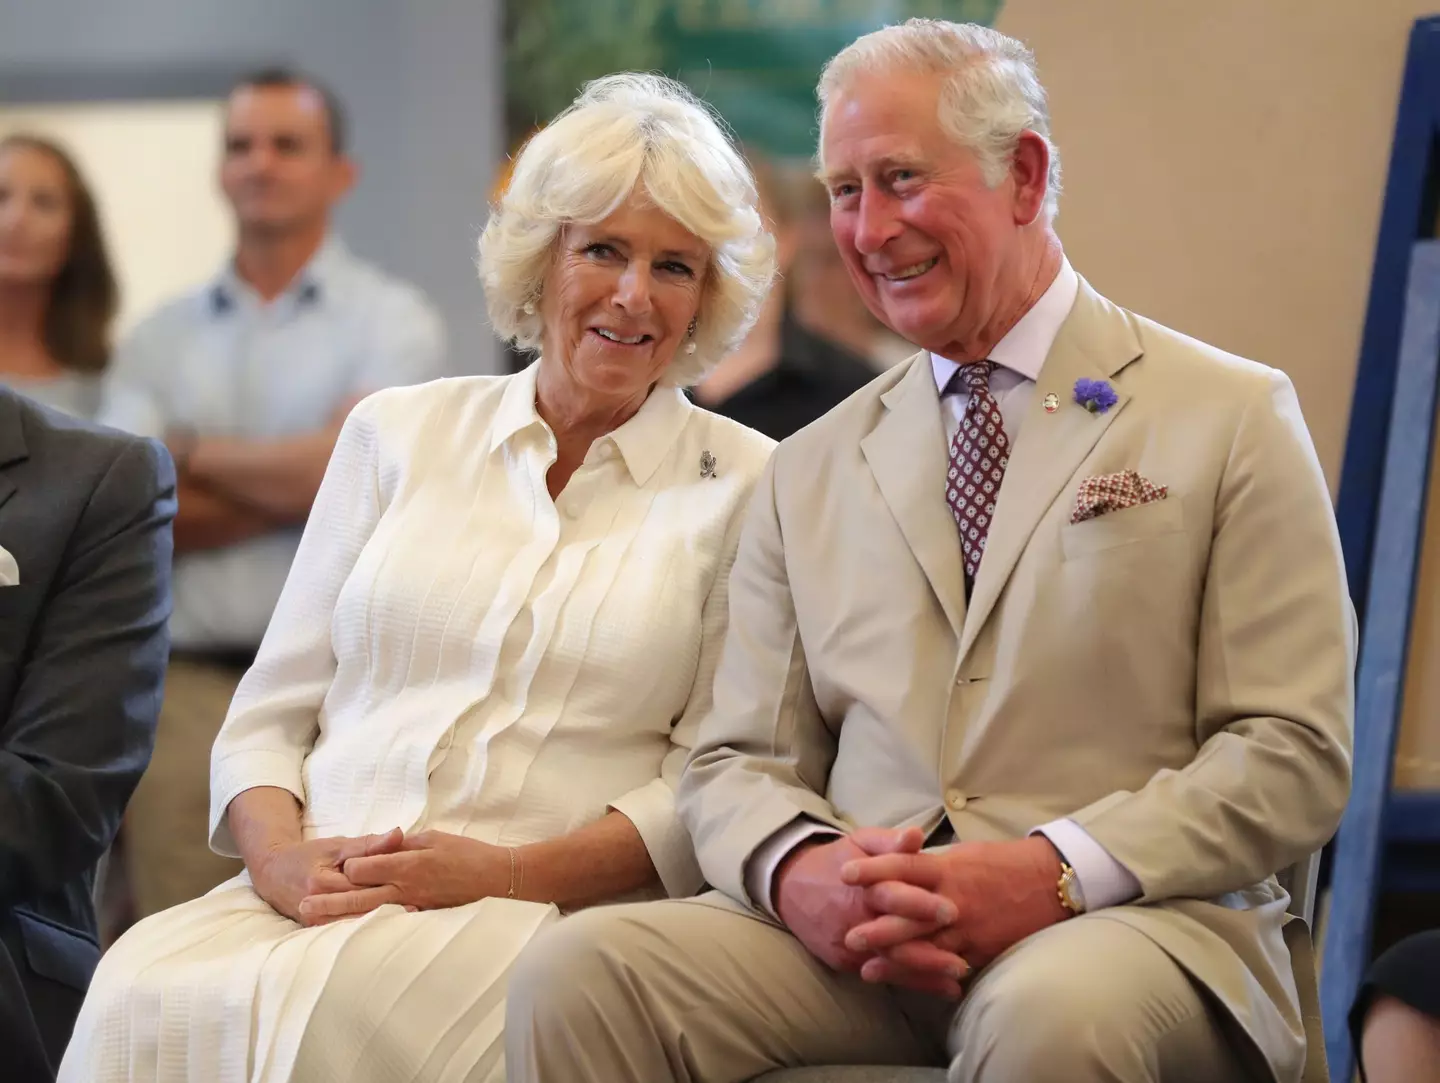 Camilla is set to be crowned the Queen Consort at King Charles' coronation.